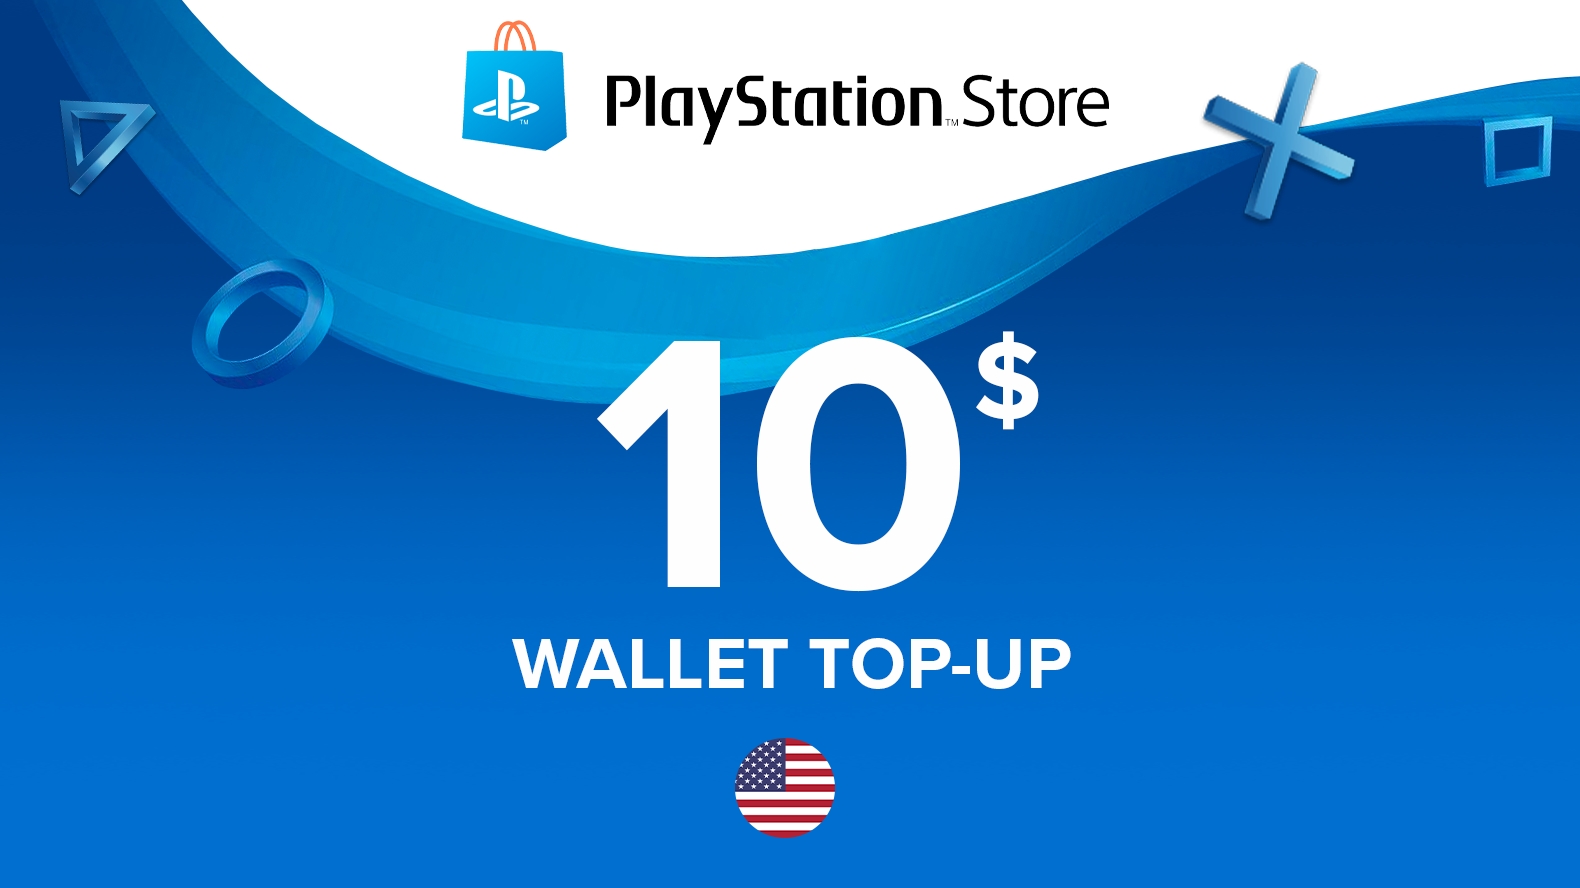 PlayStation Store Gift Card $10